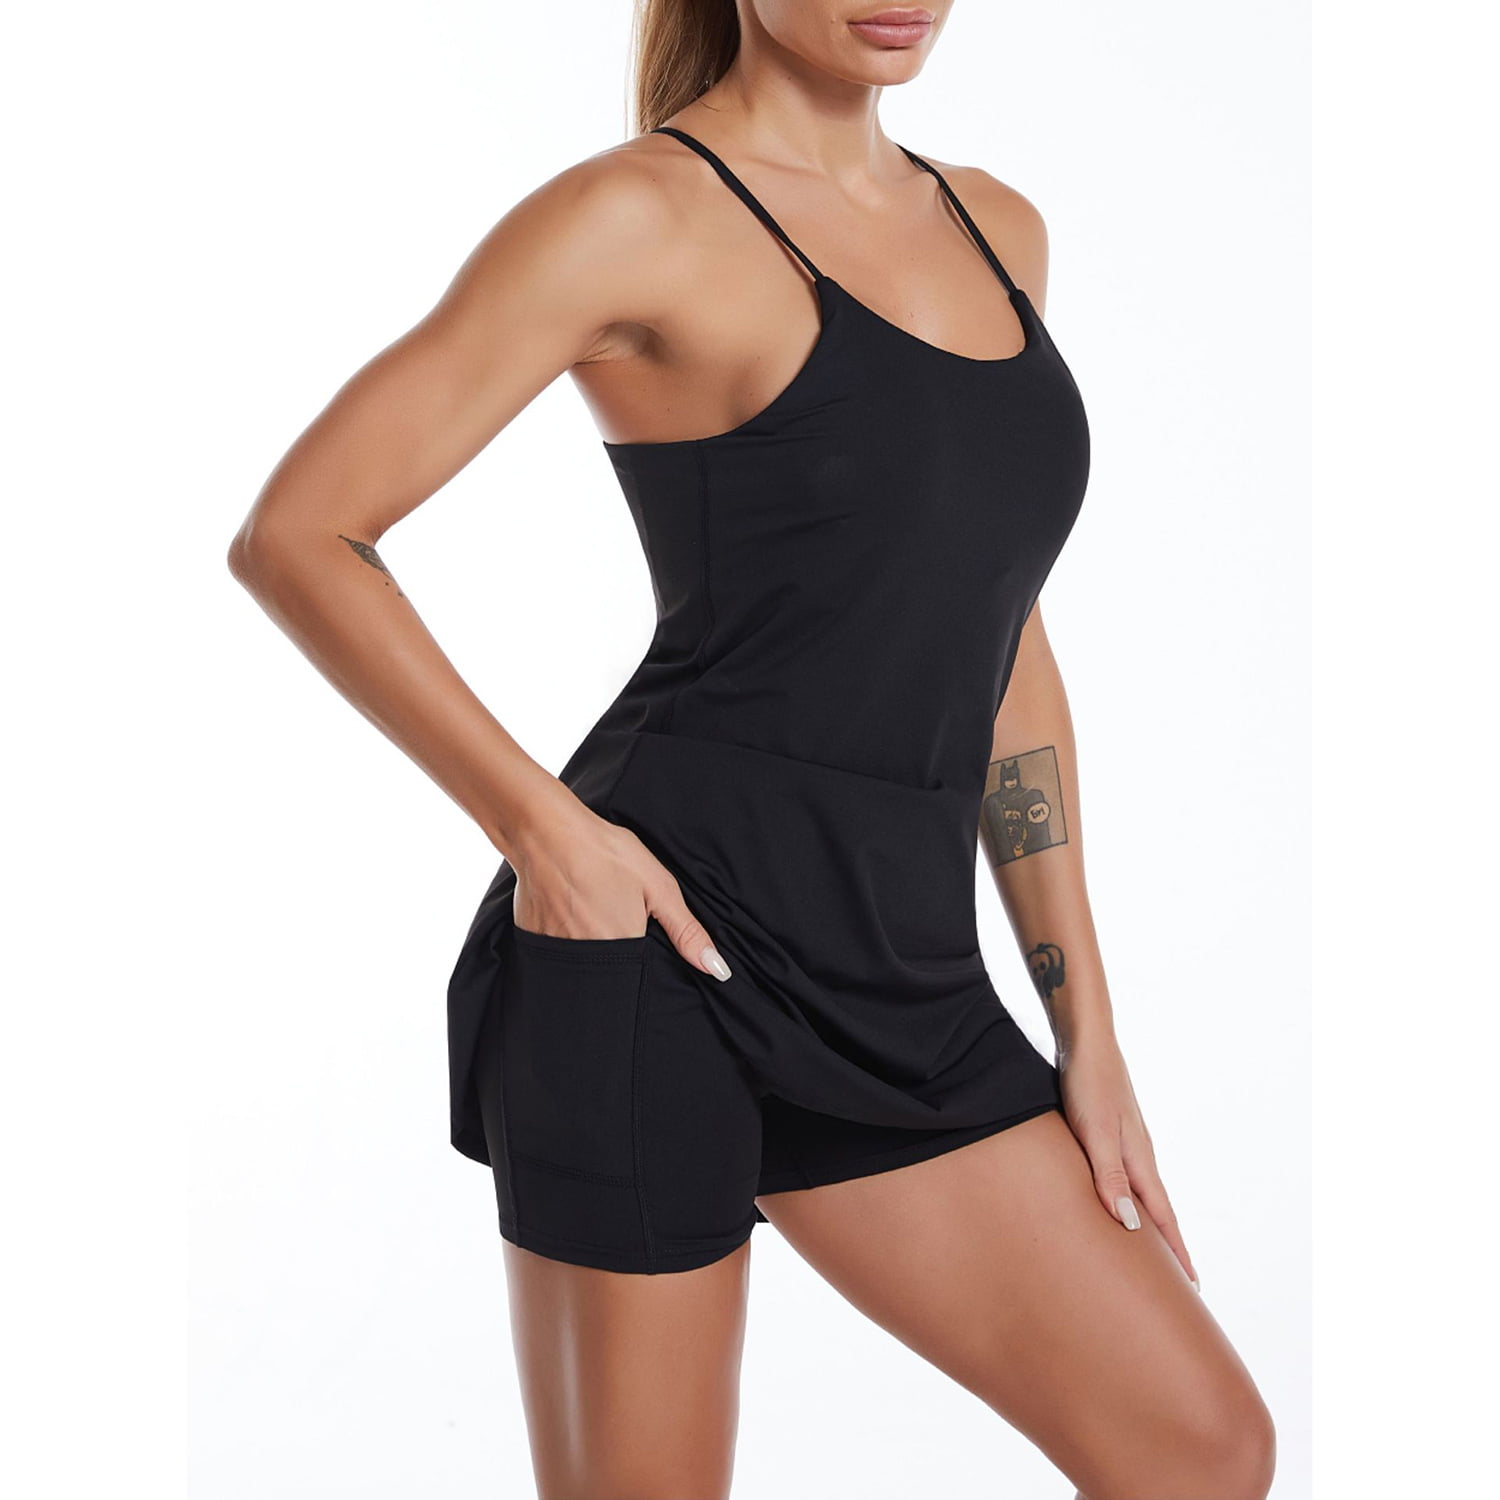 Womens Tennis Dress, Workout Dress with Built-in Bra & Shorts Pockets  Exercise Dress for Golf Athletic Dresses for Women 